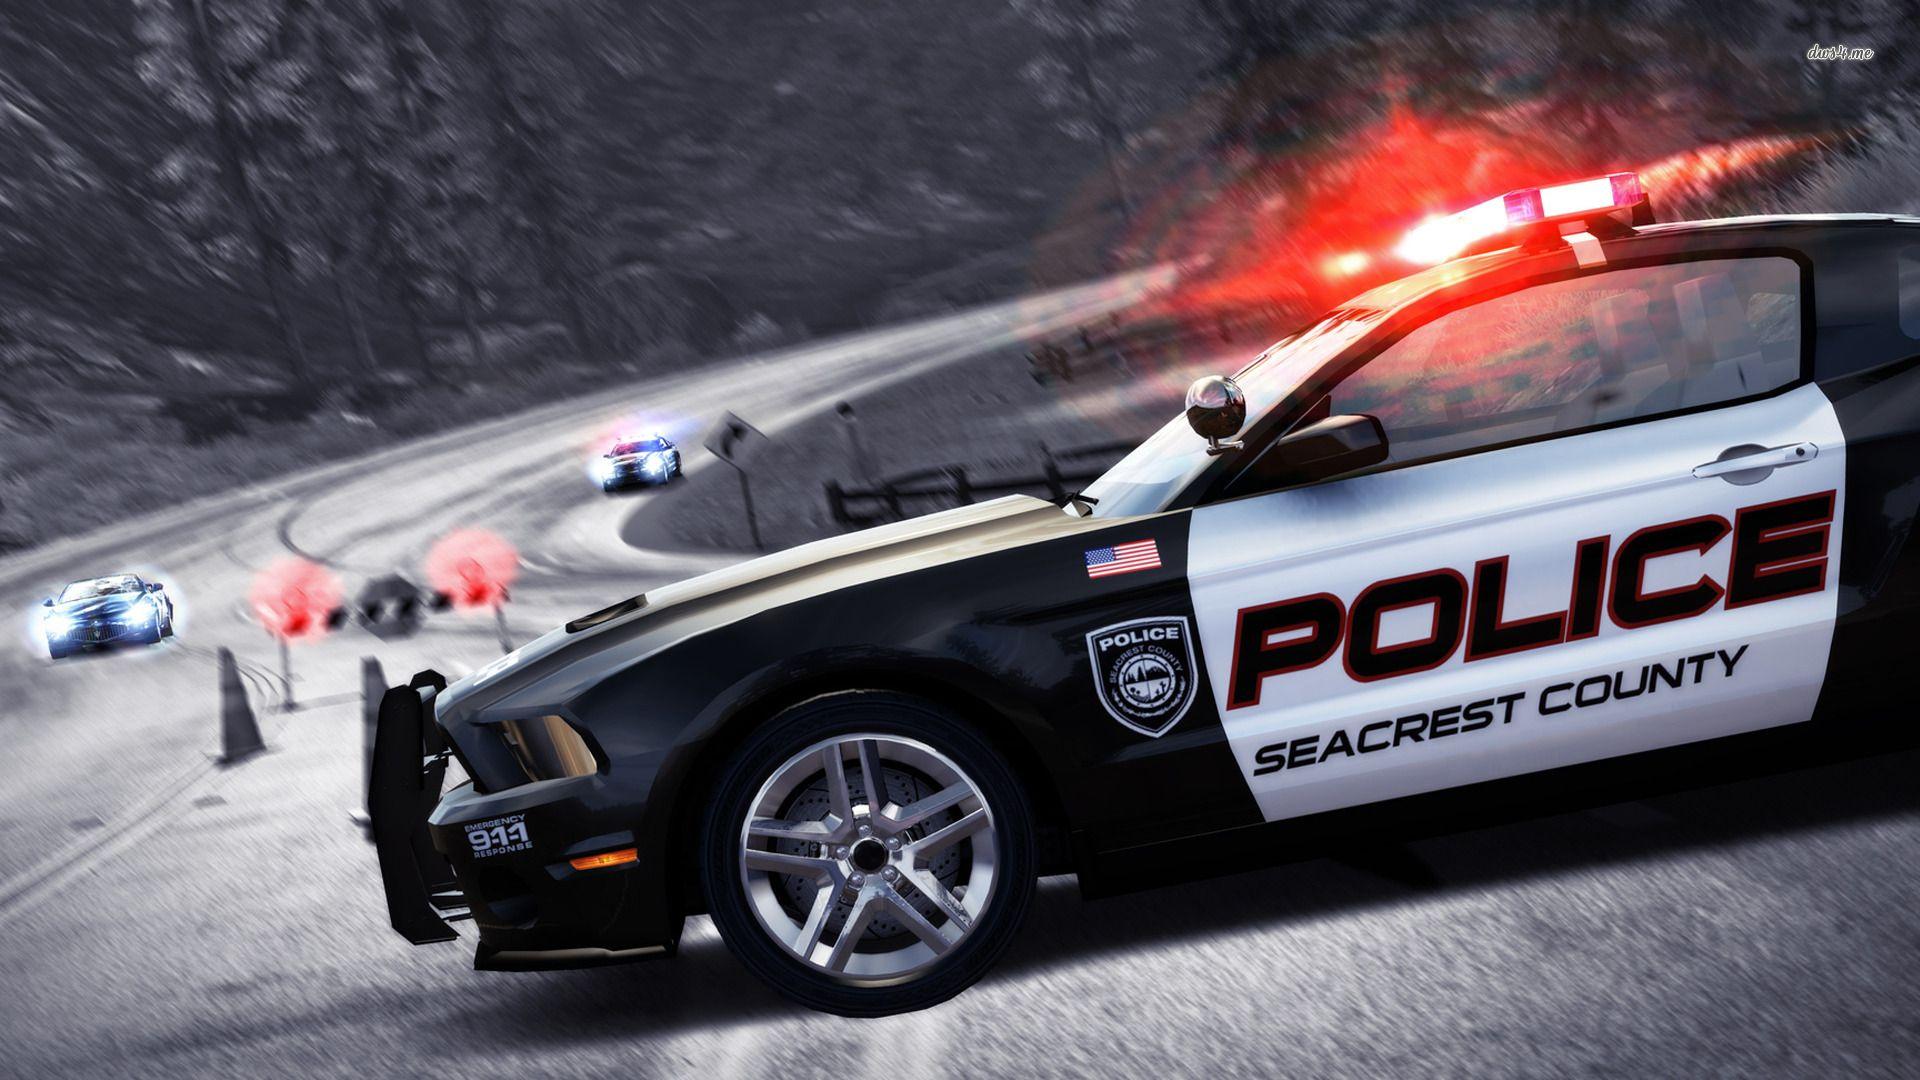 Need for Speed Pursuit police car wallpaper. Love and respect